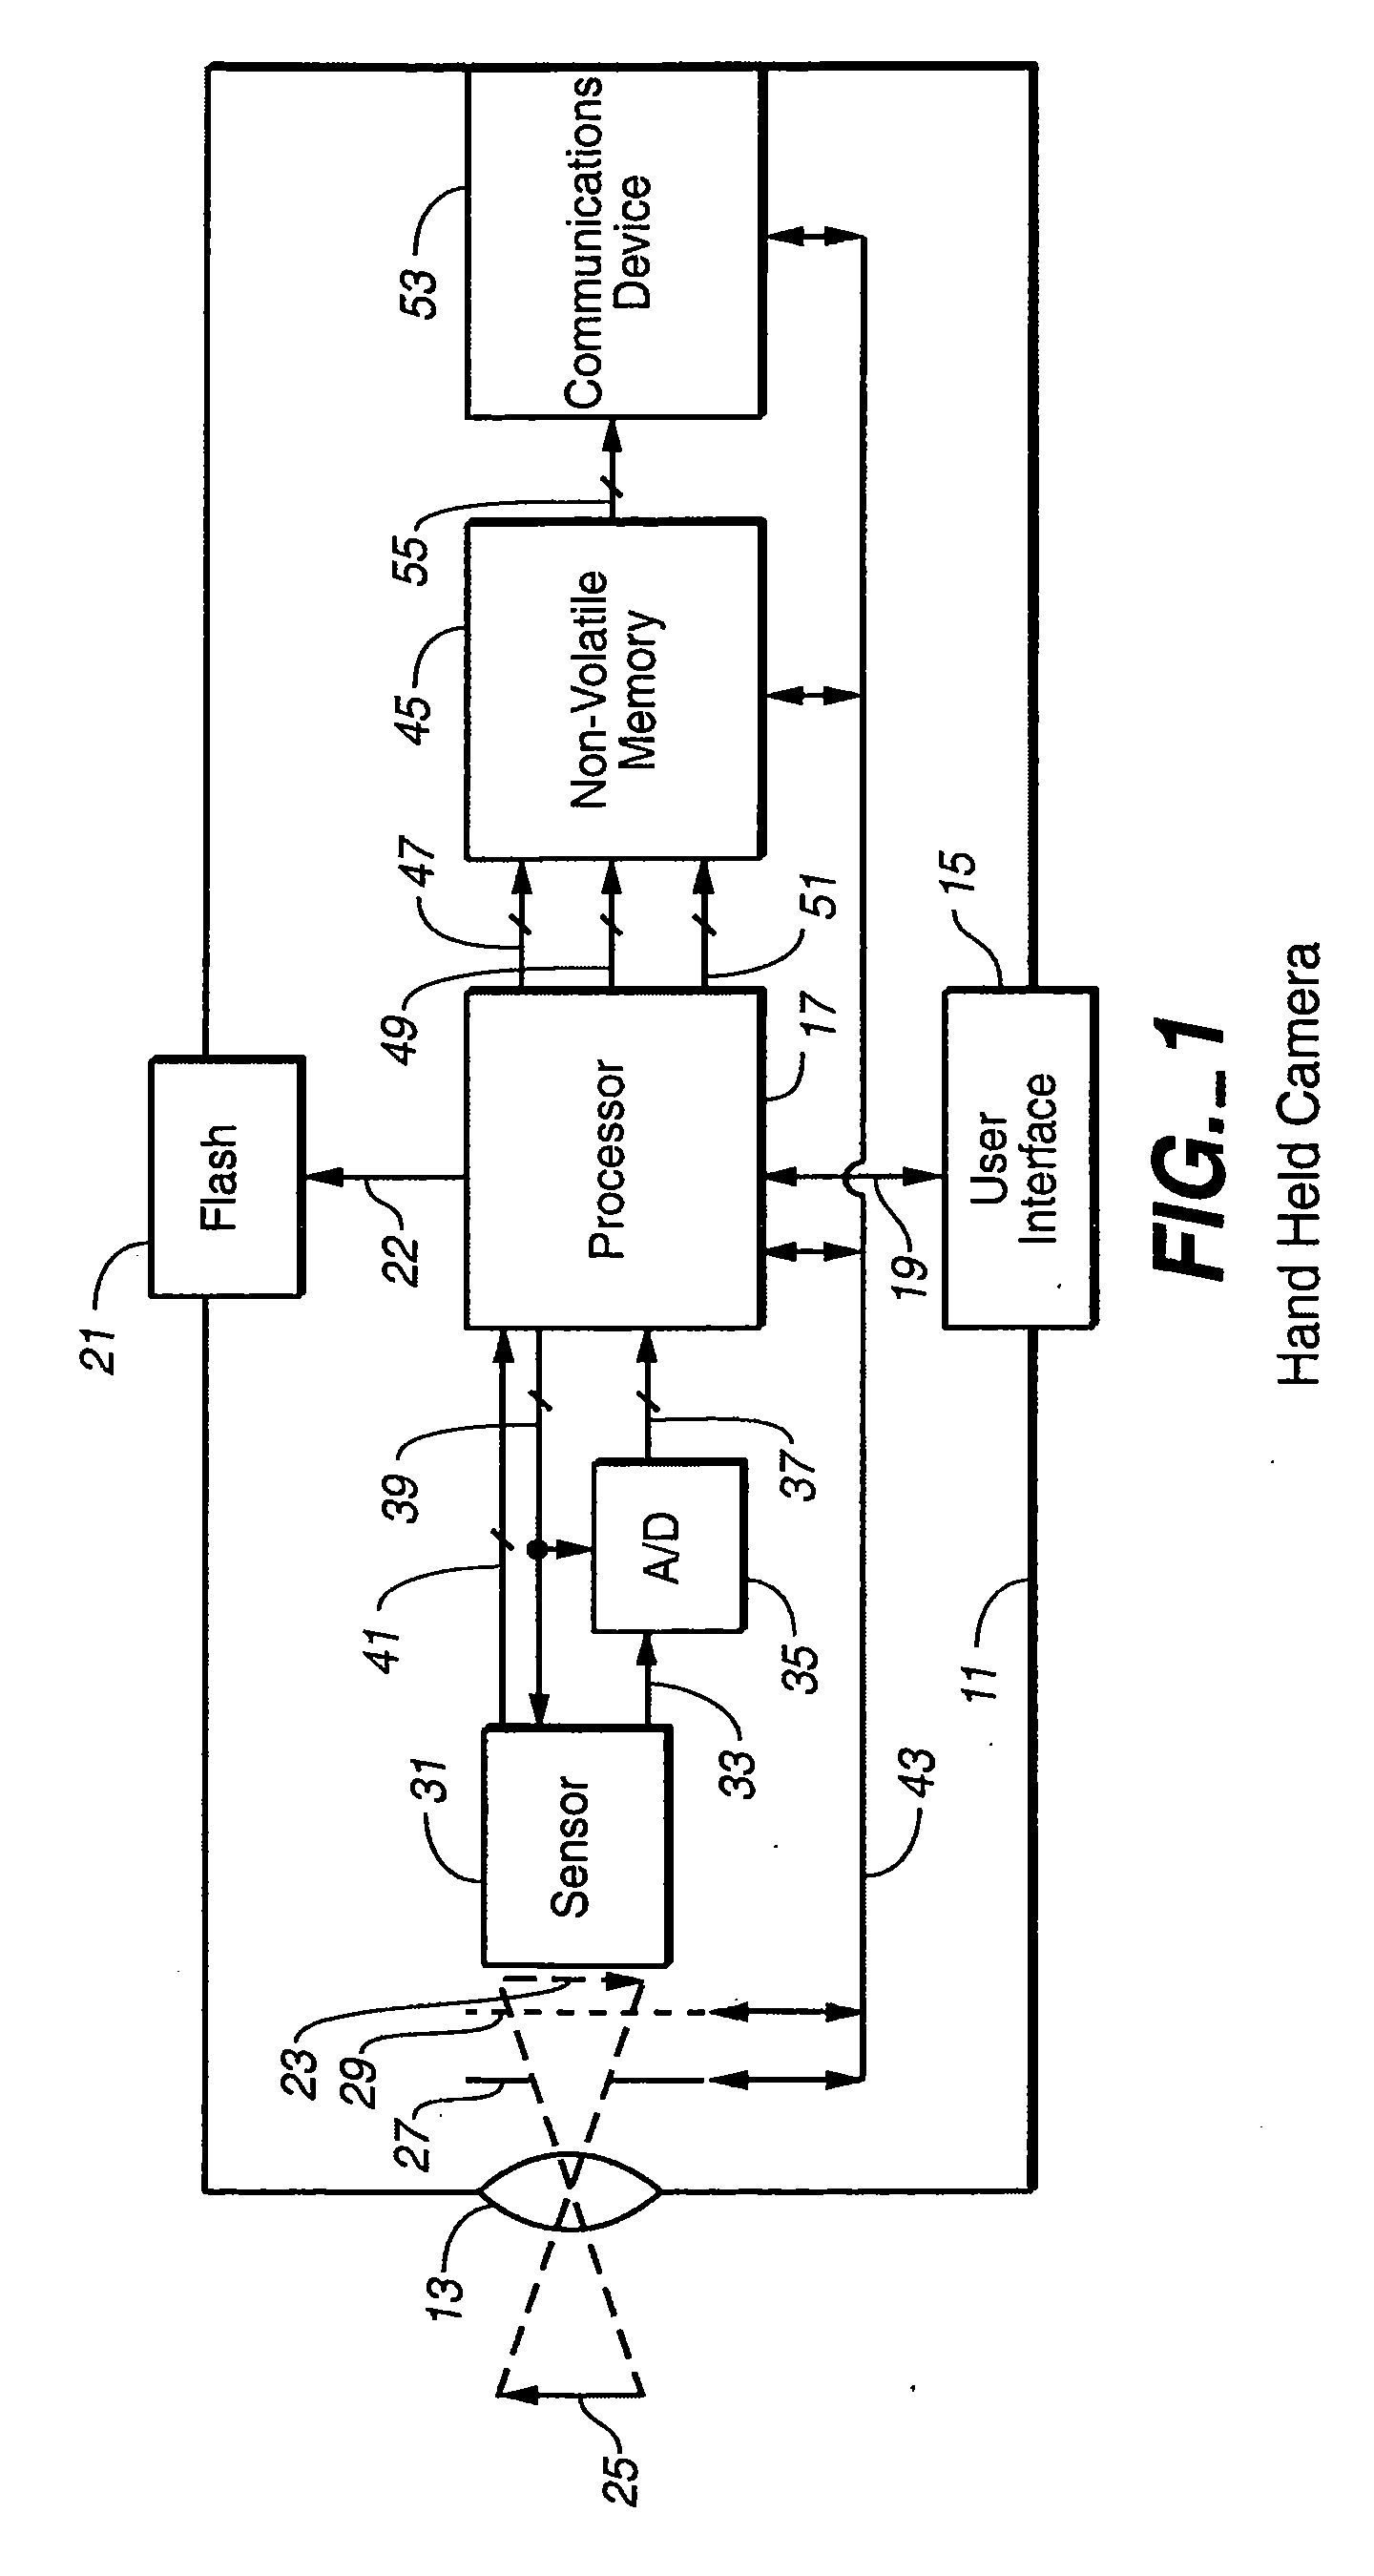 Digital camera with reduced image buffer memory and minimal processing for recycling through a service center